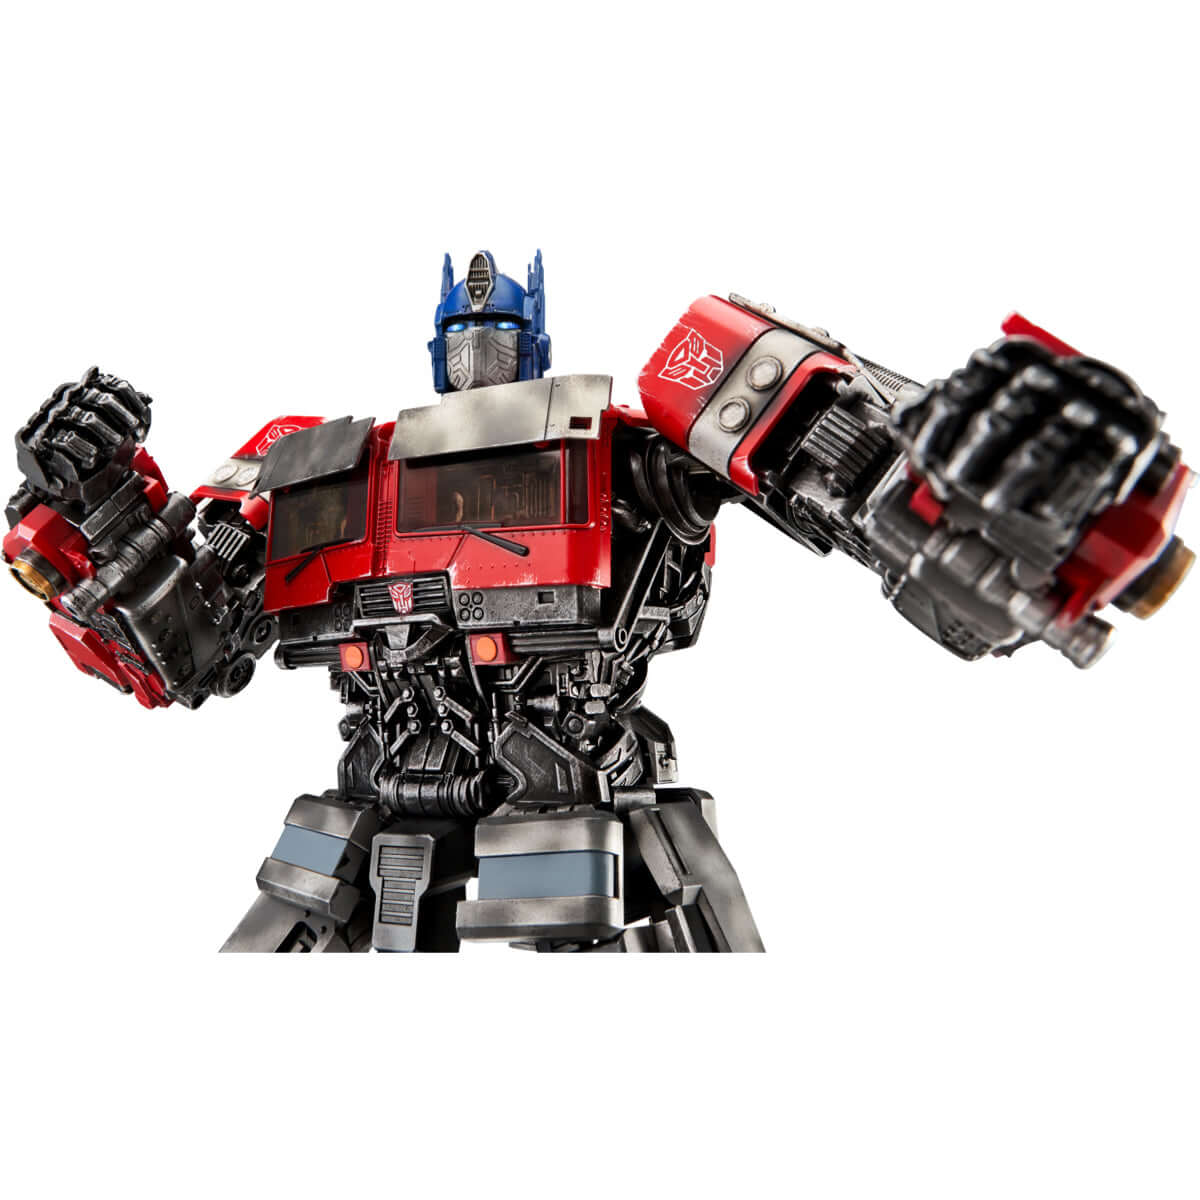 Robosen Optimus Prime Rise of the Beasts Robot (Limited Edition)